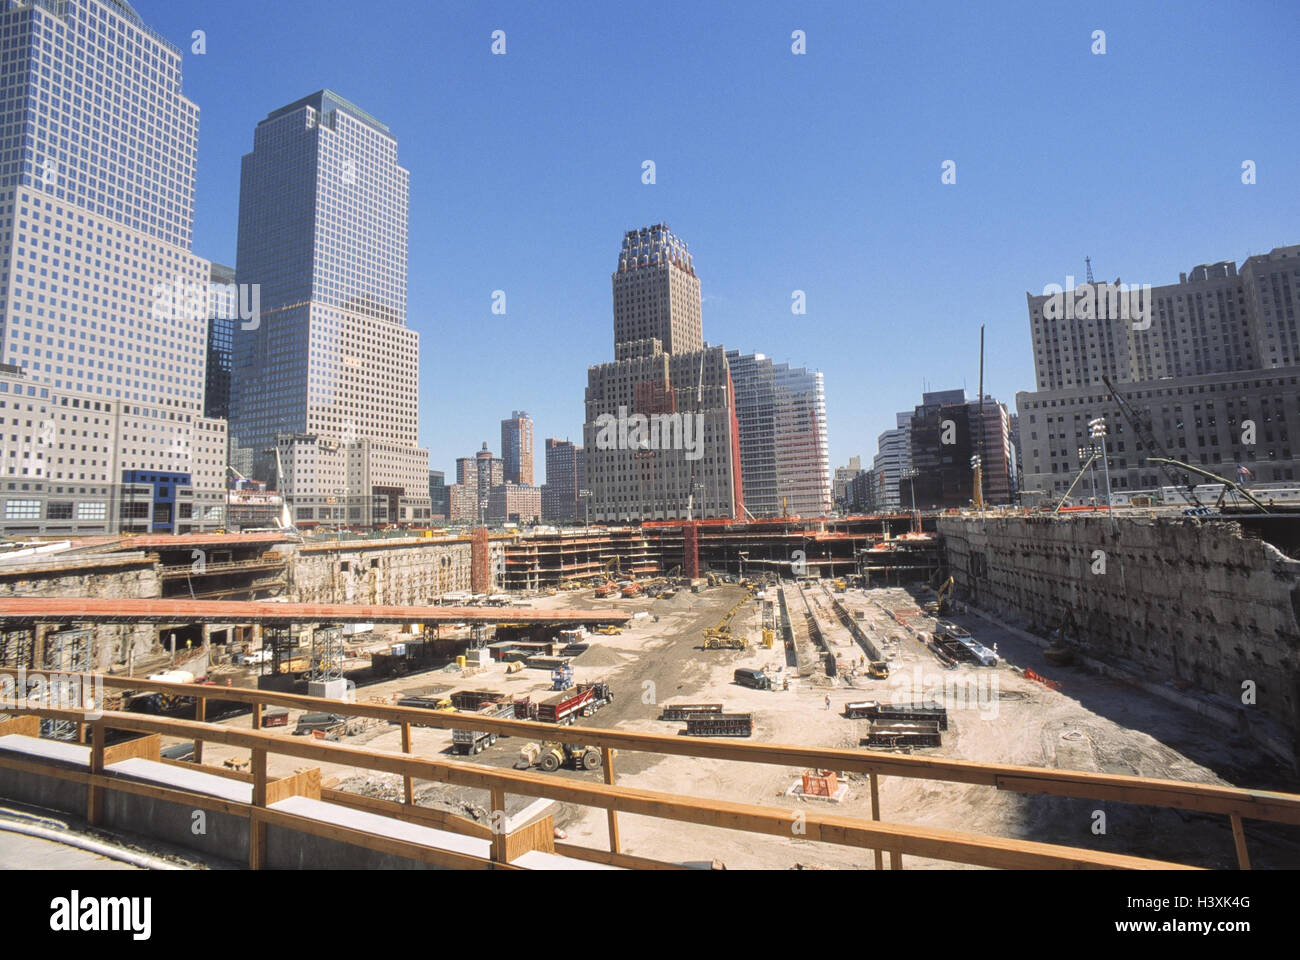 The USA, New York city, Manhattan, World Trade centre, Ground Zero, America, the United States, town view, high rises, men at work, WTC, after the 11th September, 2001, terrorist attack, clearing works, reconstruction Stock Photo